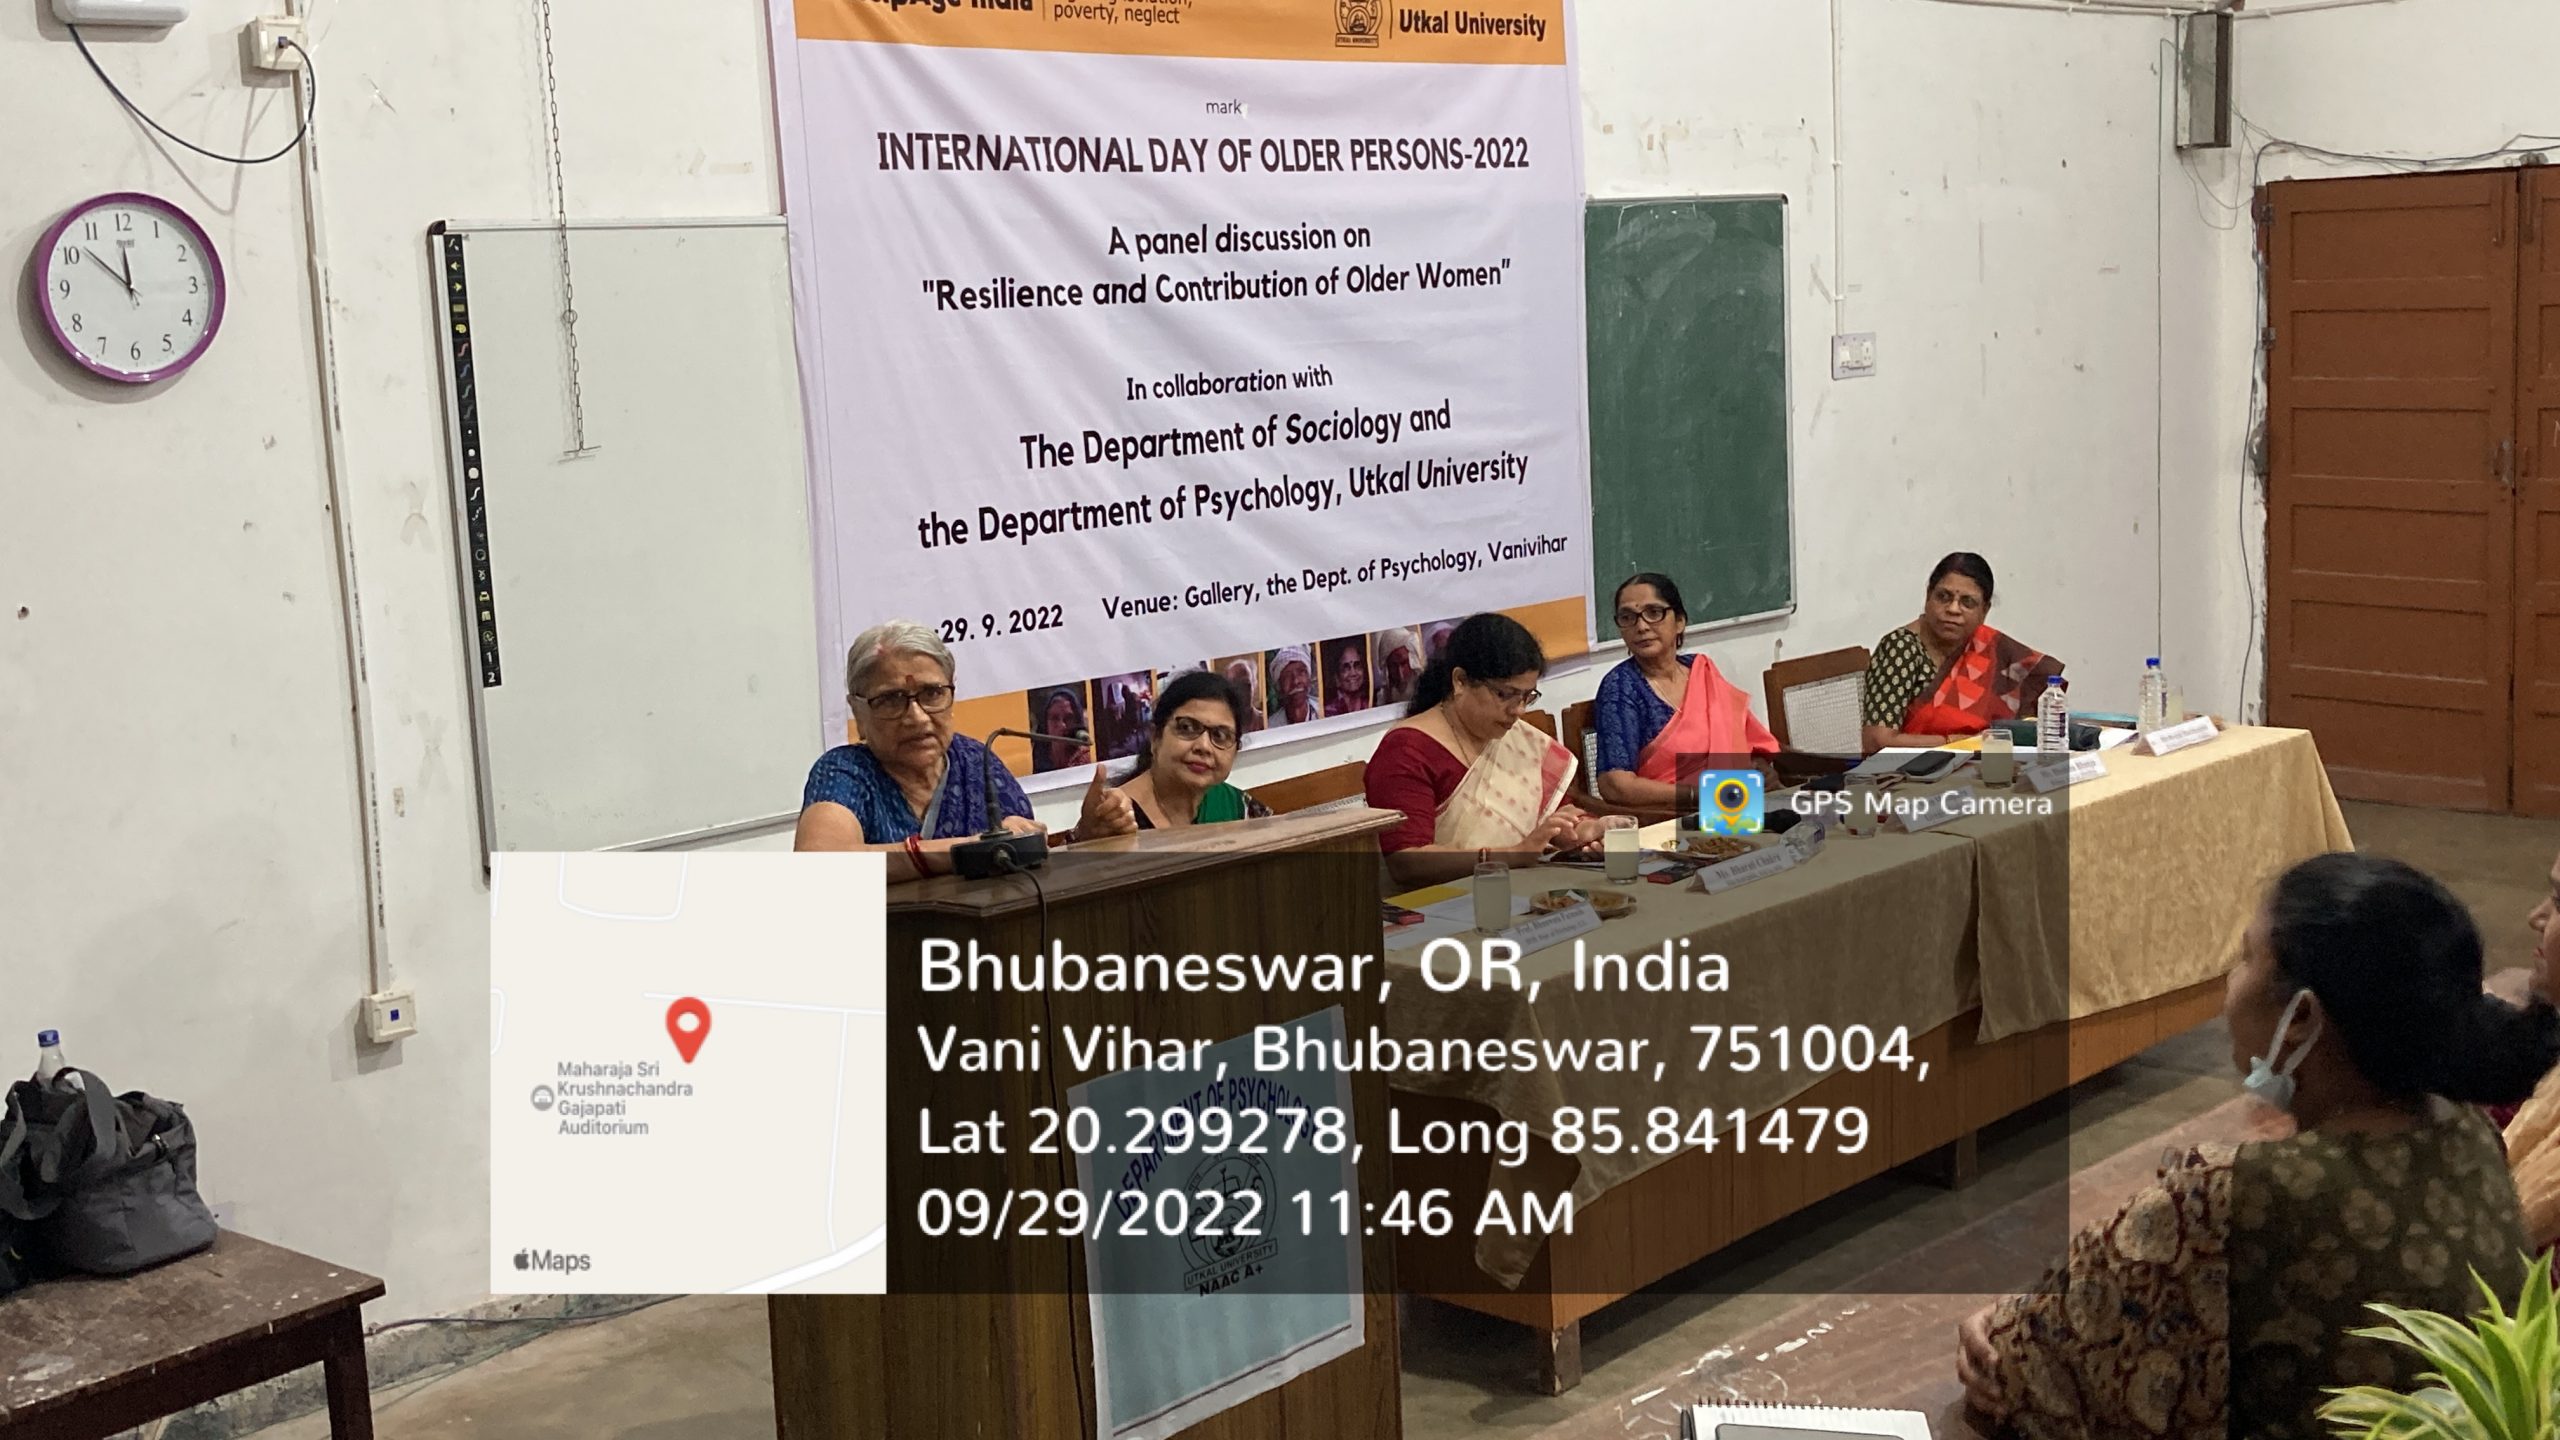 Department of Sociology Observed “International Day of Older Persons-2022” on 29th September 2022